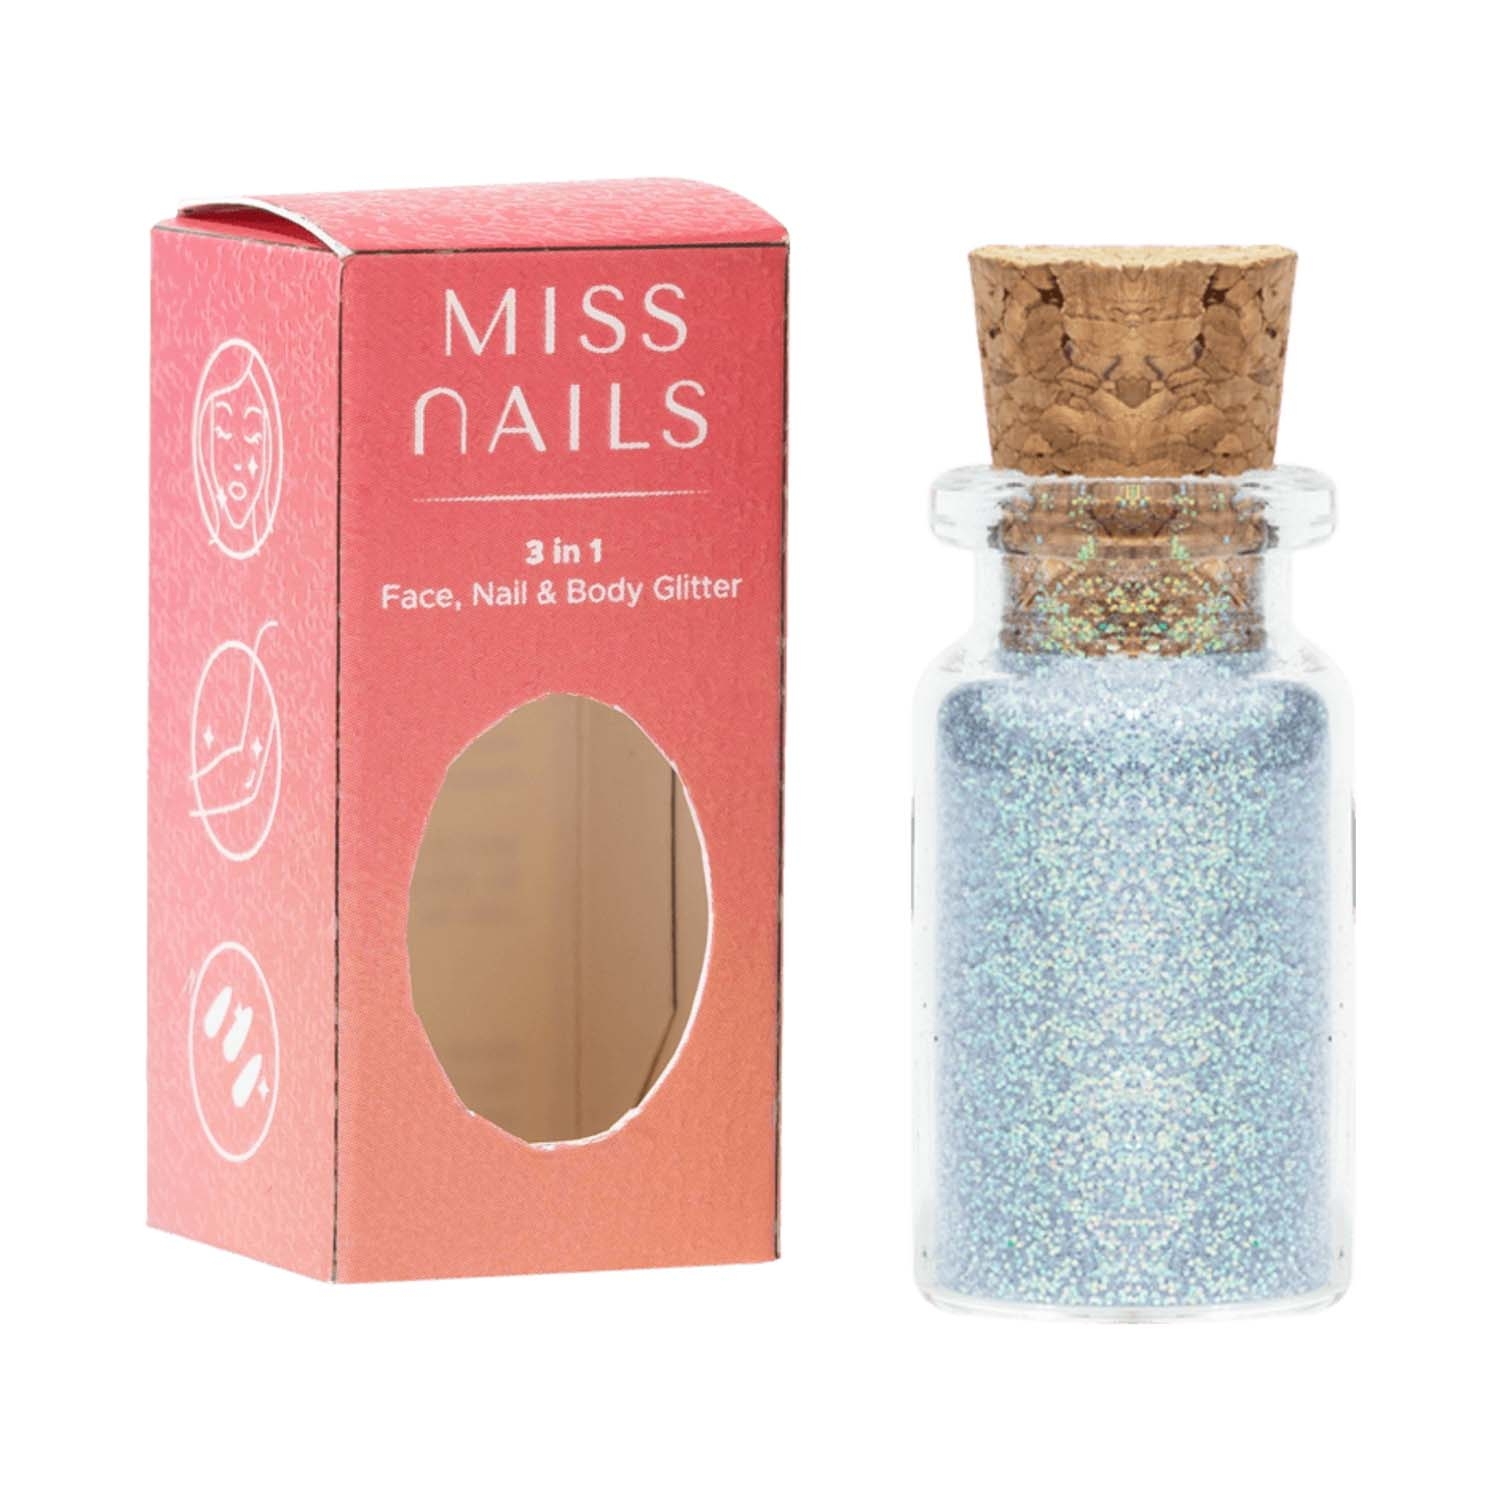 Miss Nails | Miss Nails 3 In 1 Glitter Nail Polish - 13 Holographic Silver (5g)